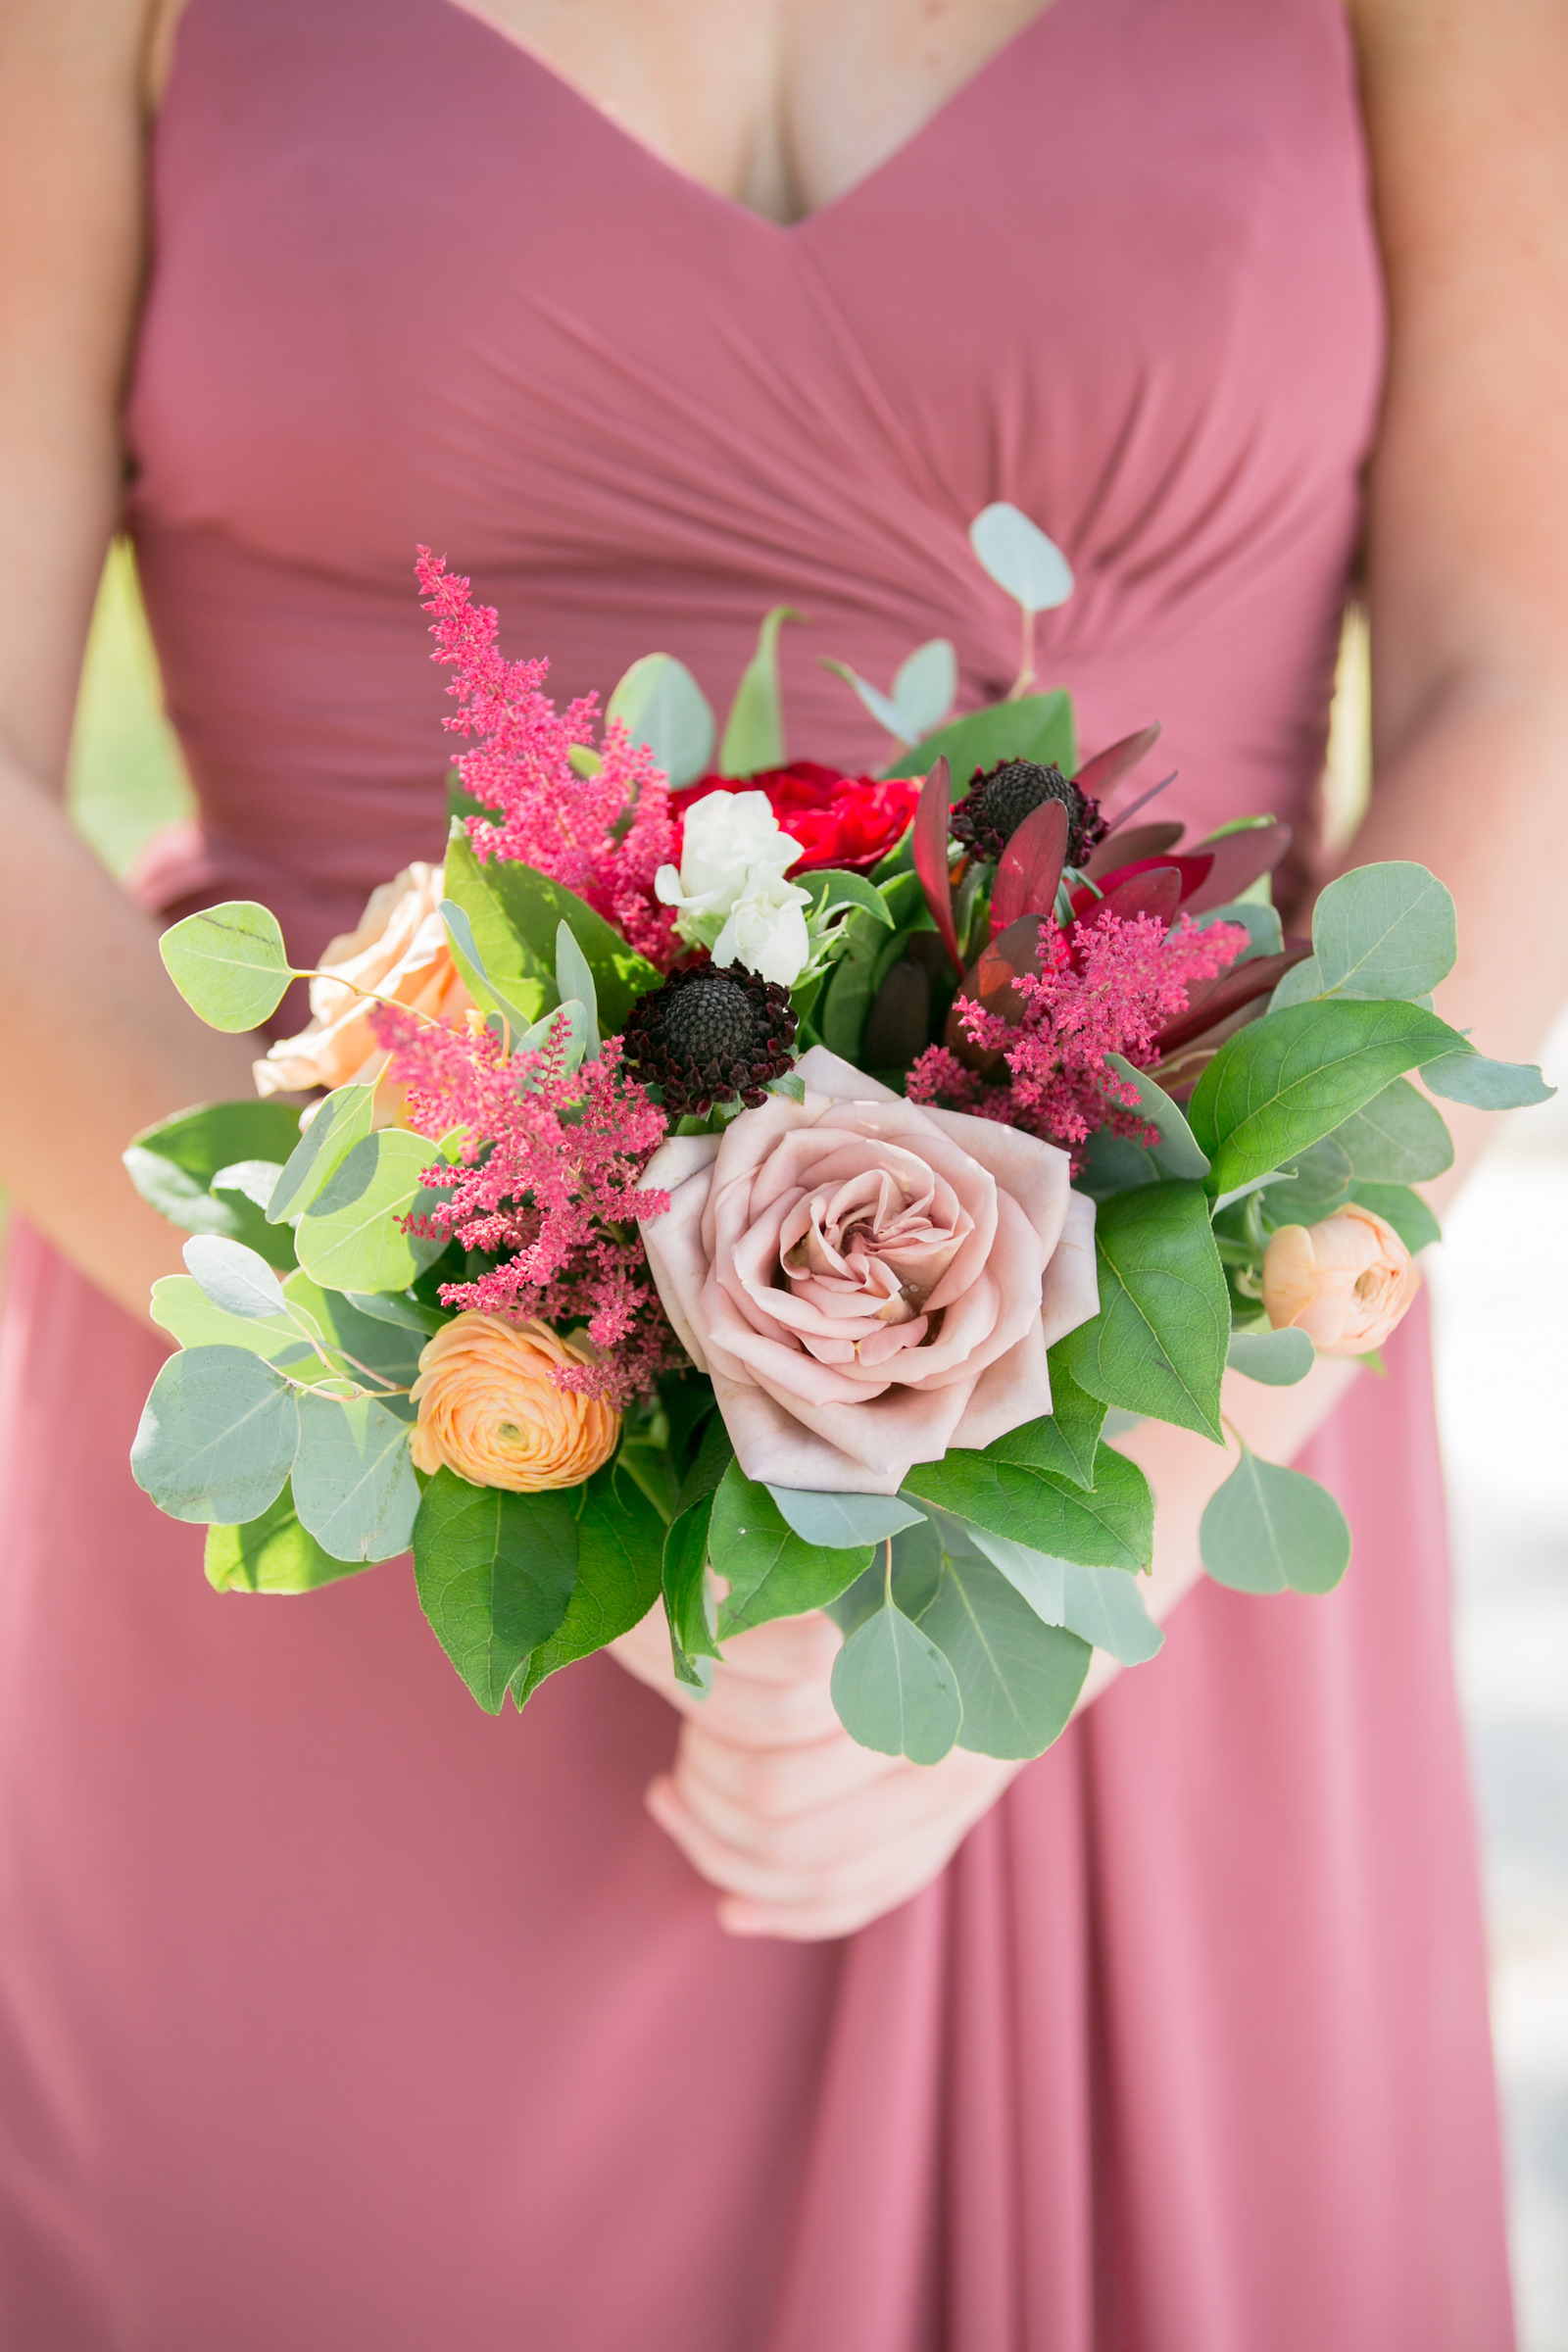 Dusty Rose and Mauve Wedding, Bridesmaids Wearing Dusty Rose Dress Holding Greenery Leaves, Blush Pink Roses, Pink and Red Flower Bouquet | Tampa Bay Wedding Photographer Carrie Wildes Photography | Wedding Florist Iza’s Flowers